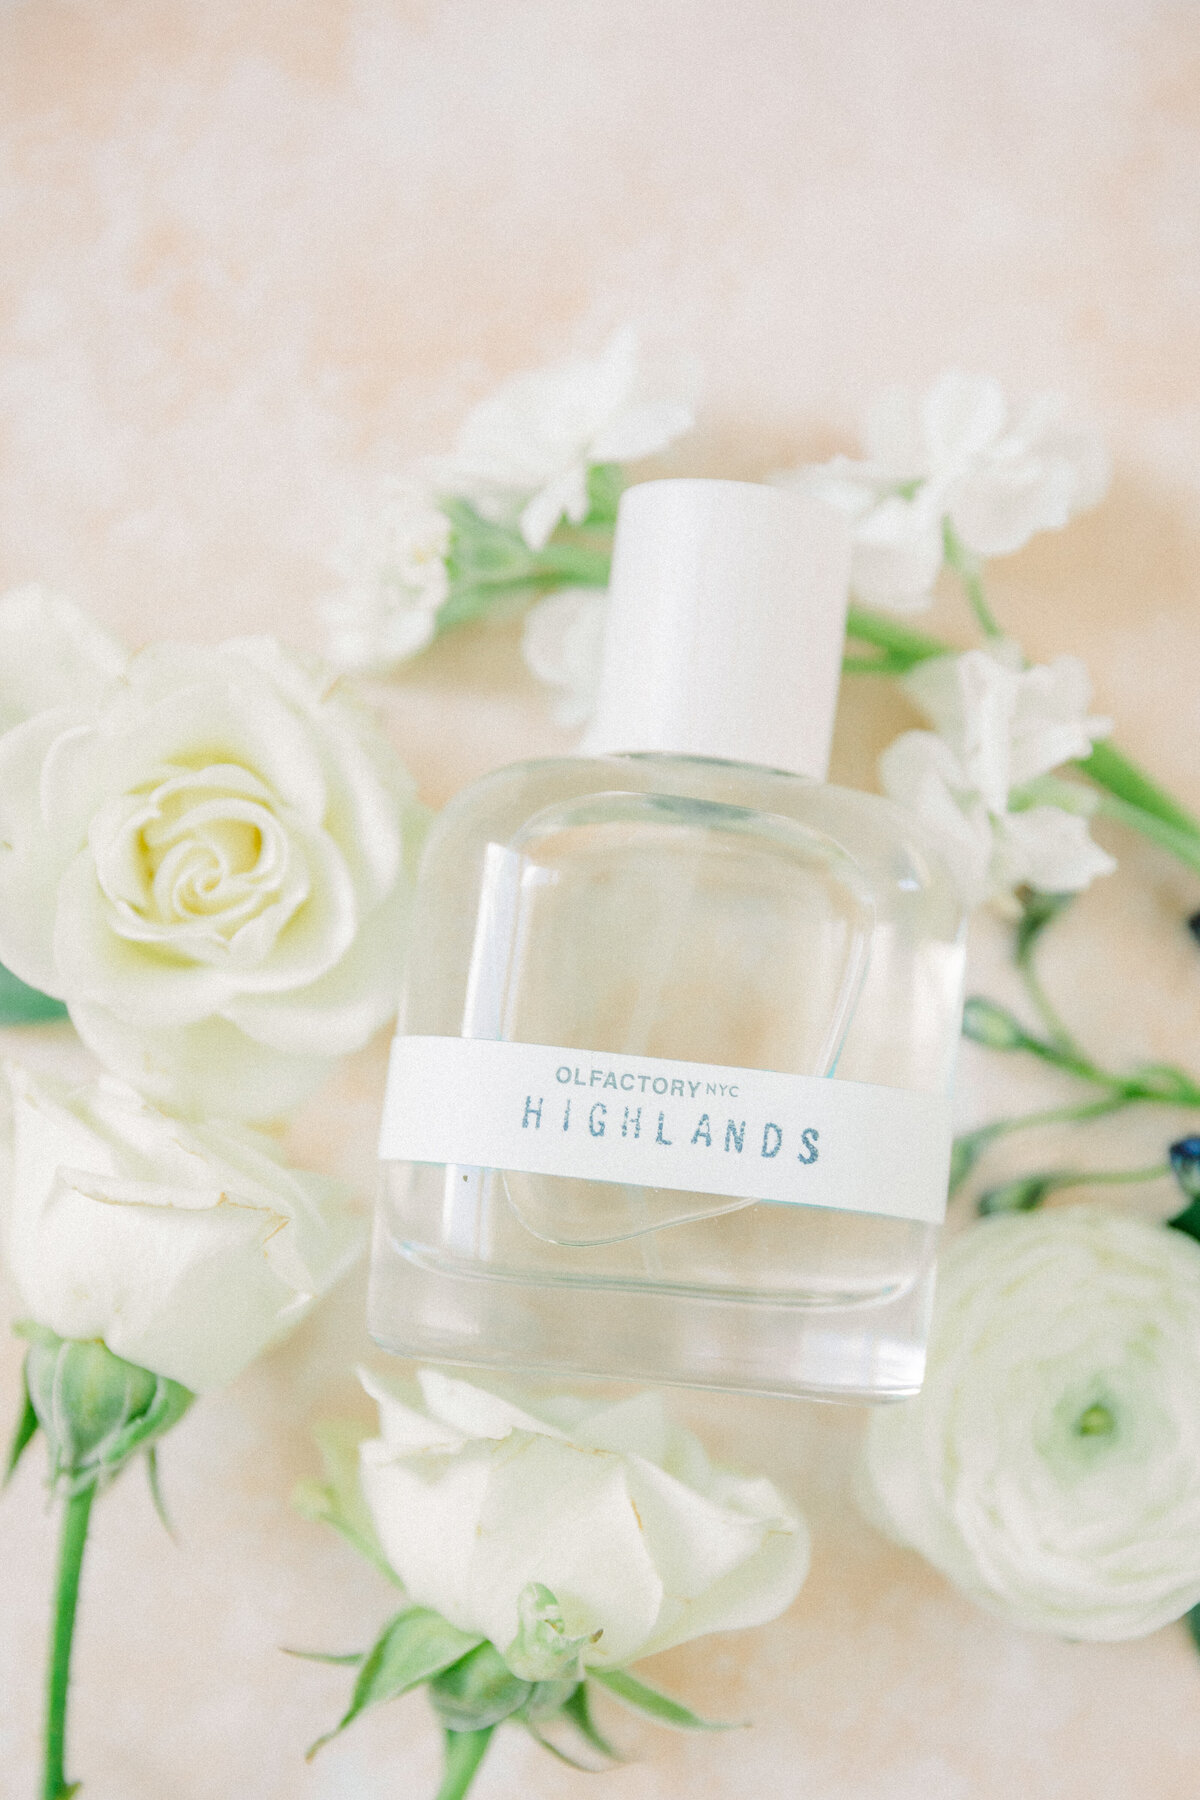 Olfactory NYC Highlands perfume surrounded by beautiful white florals